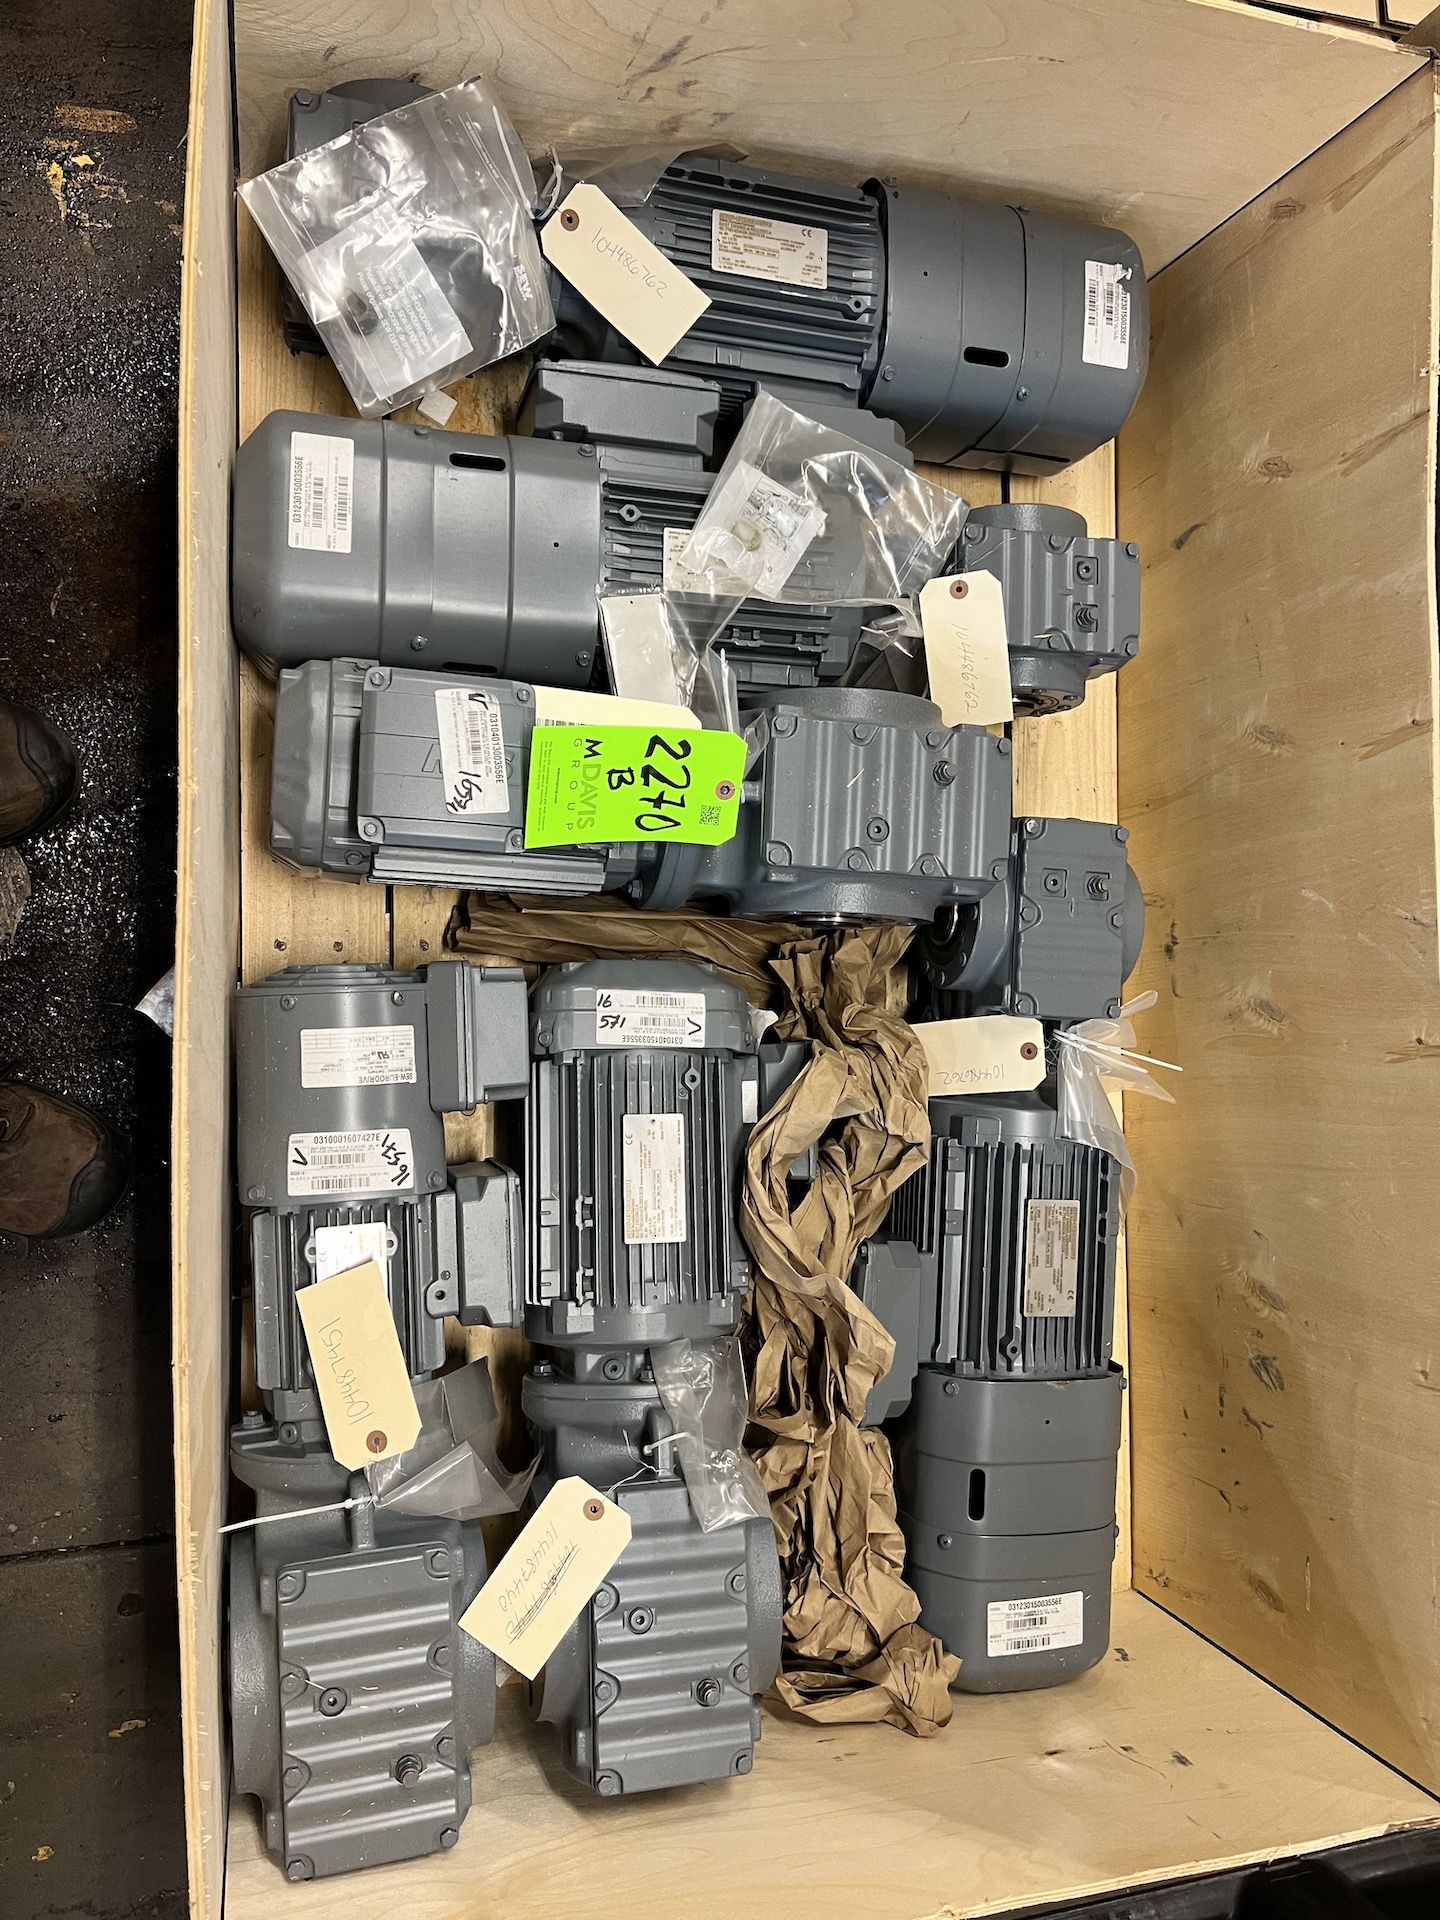 (6) NEW SEW EURODRIVE MOTORS WITH GEARBOXES, 60 HZ, 1767/61 R/MIN